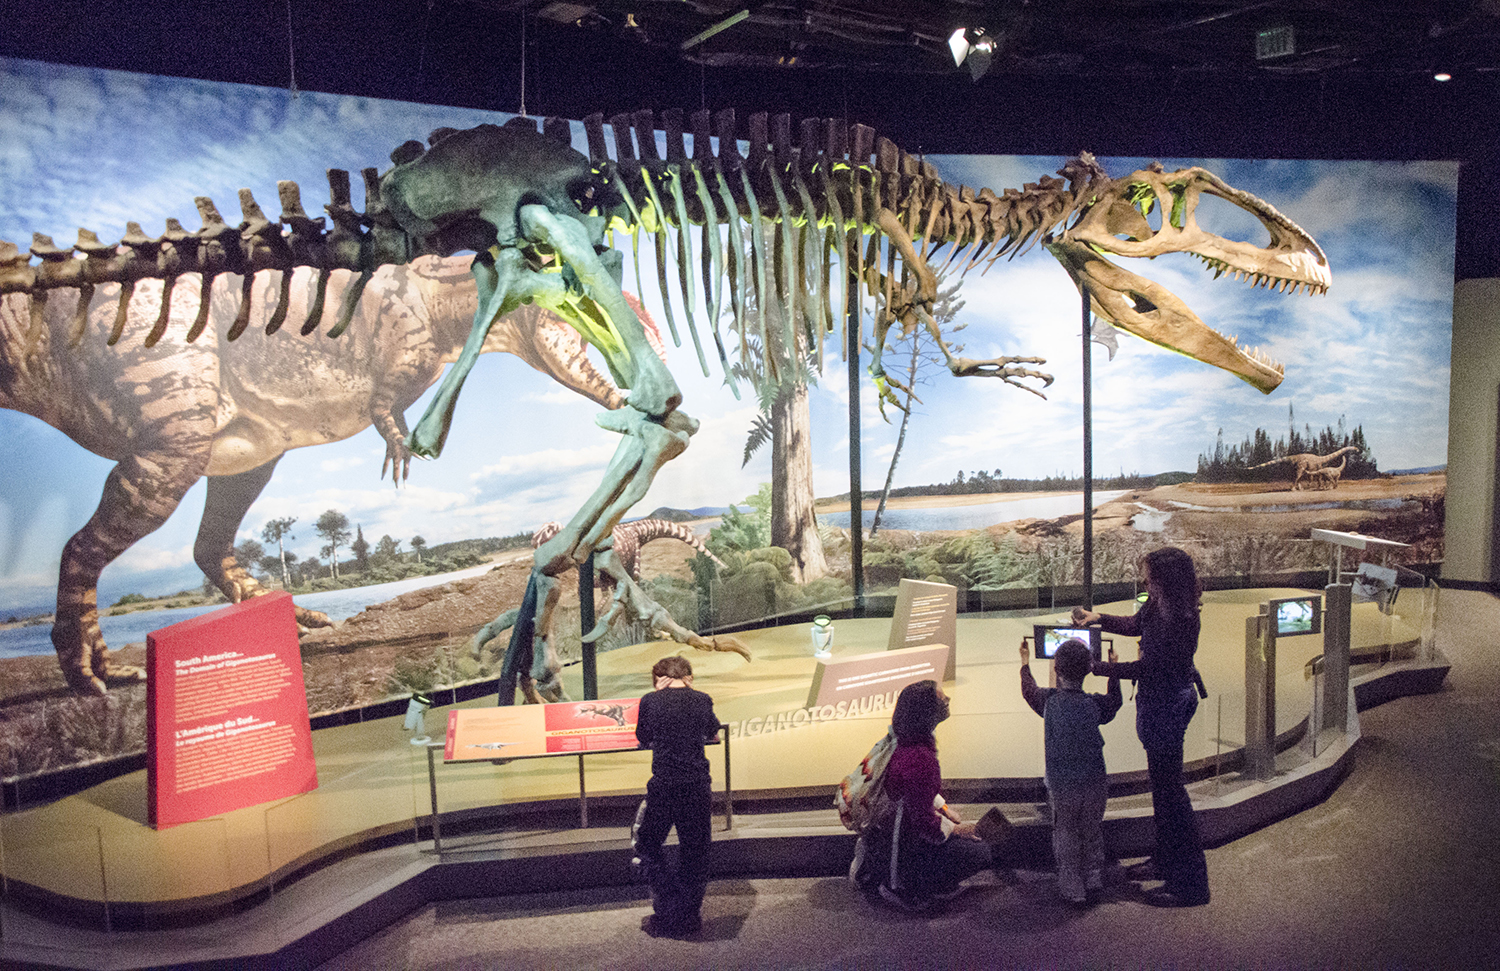 Ultimate Dinosaurs at the Iowa Science Center